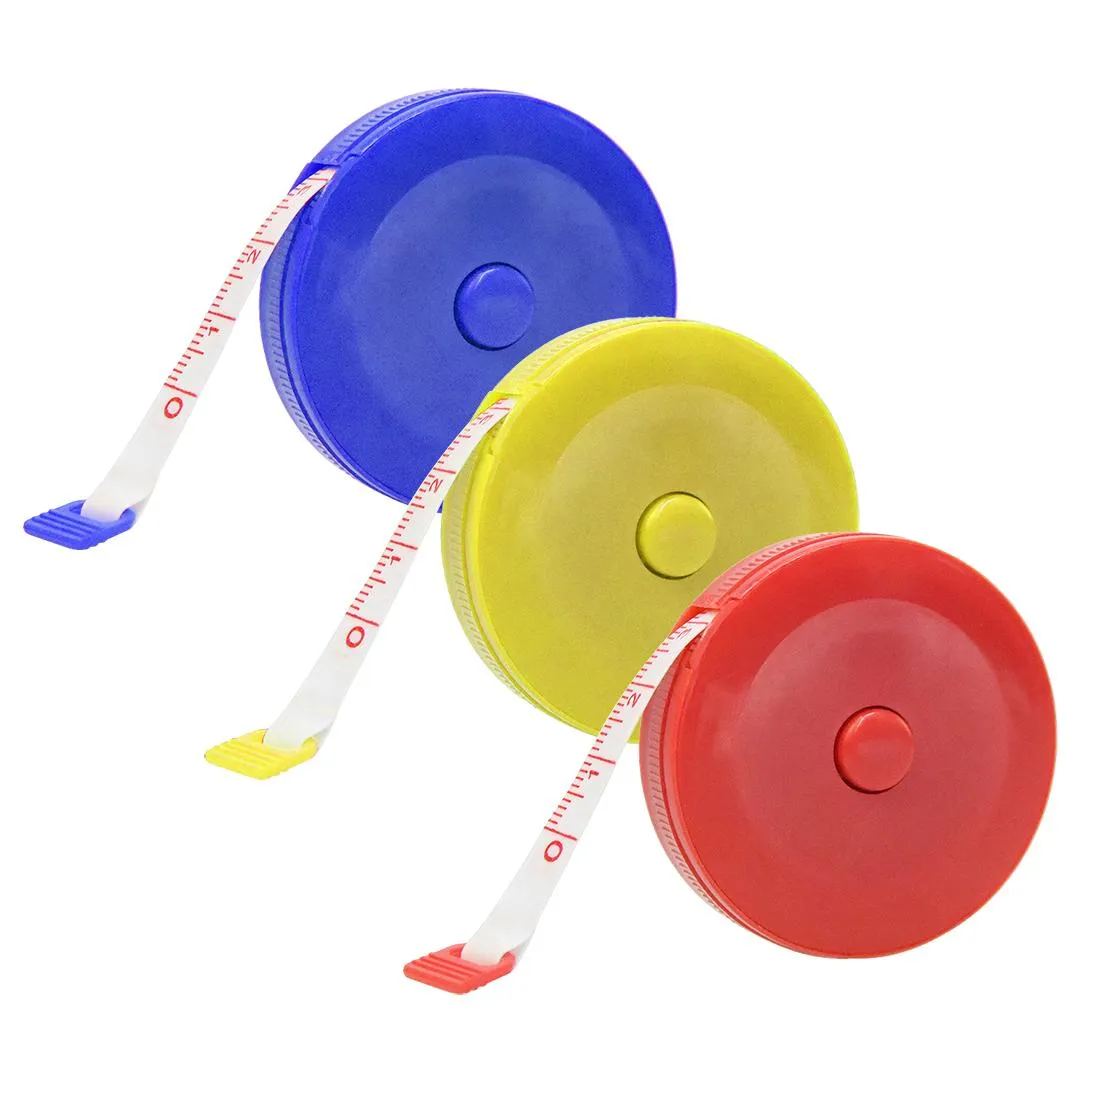 Wholesale Flexible Mini Push Button Self Adhesive Measuring Tape 150cm,  Round Ruler With Random Color From Ewin24, $1.93